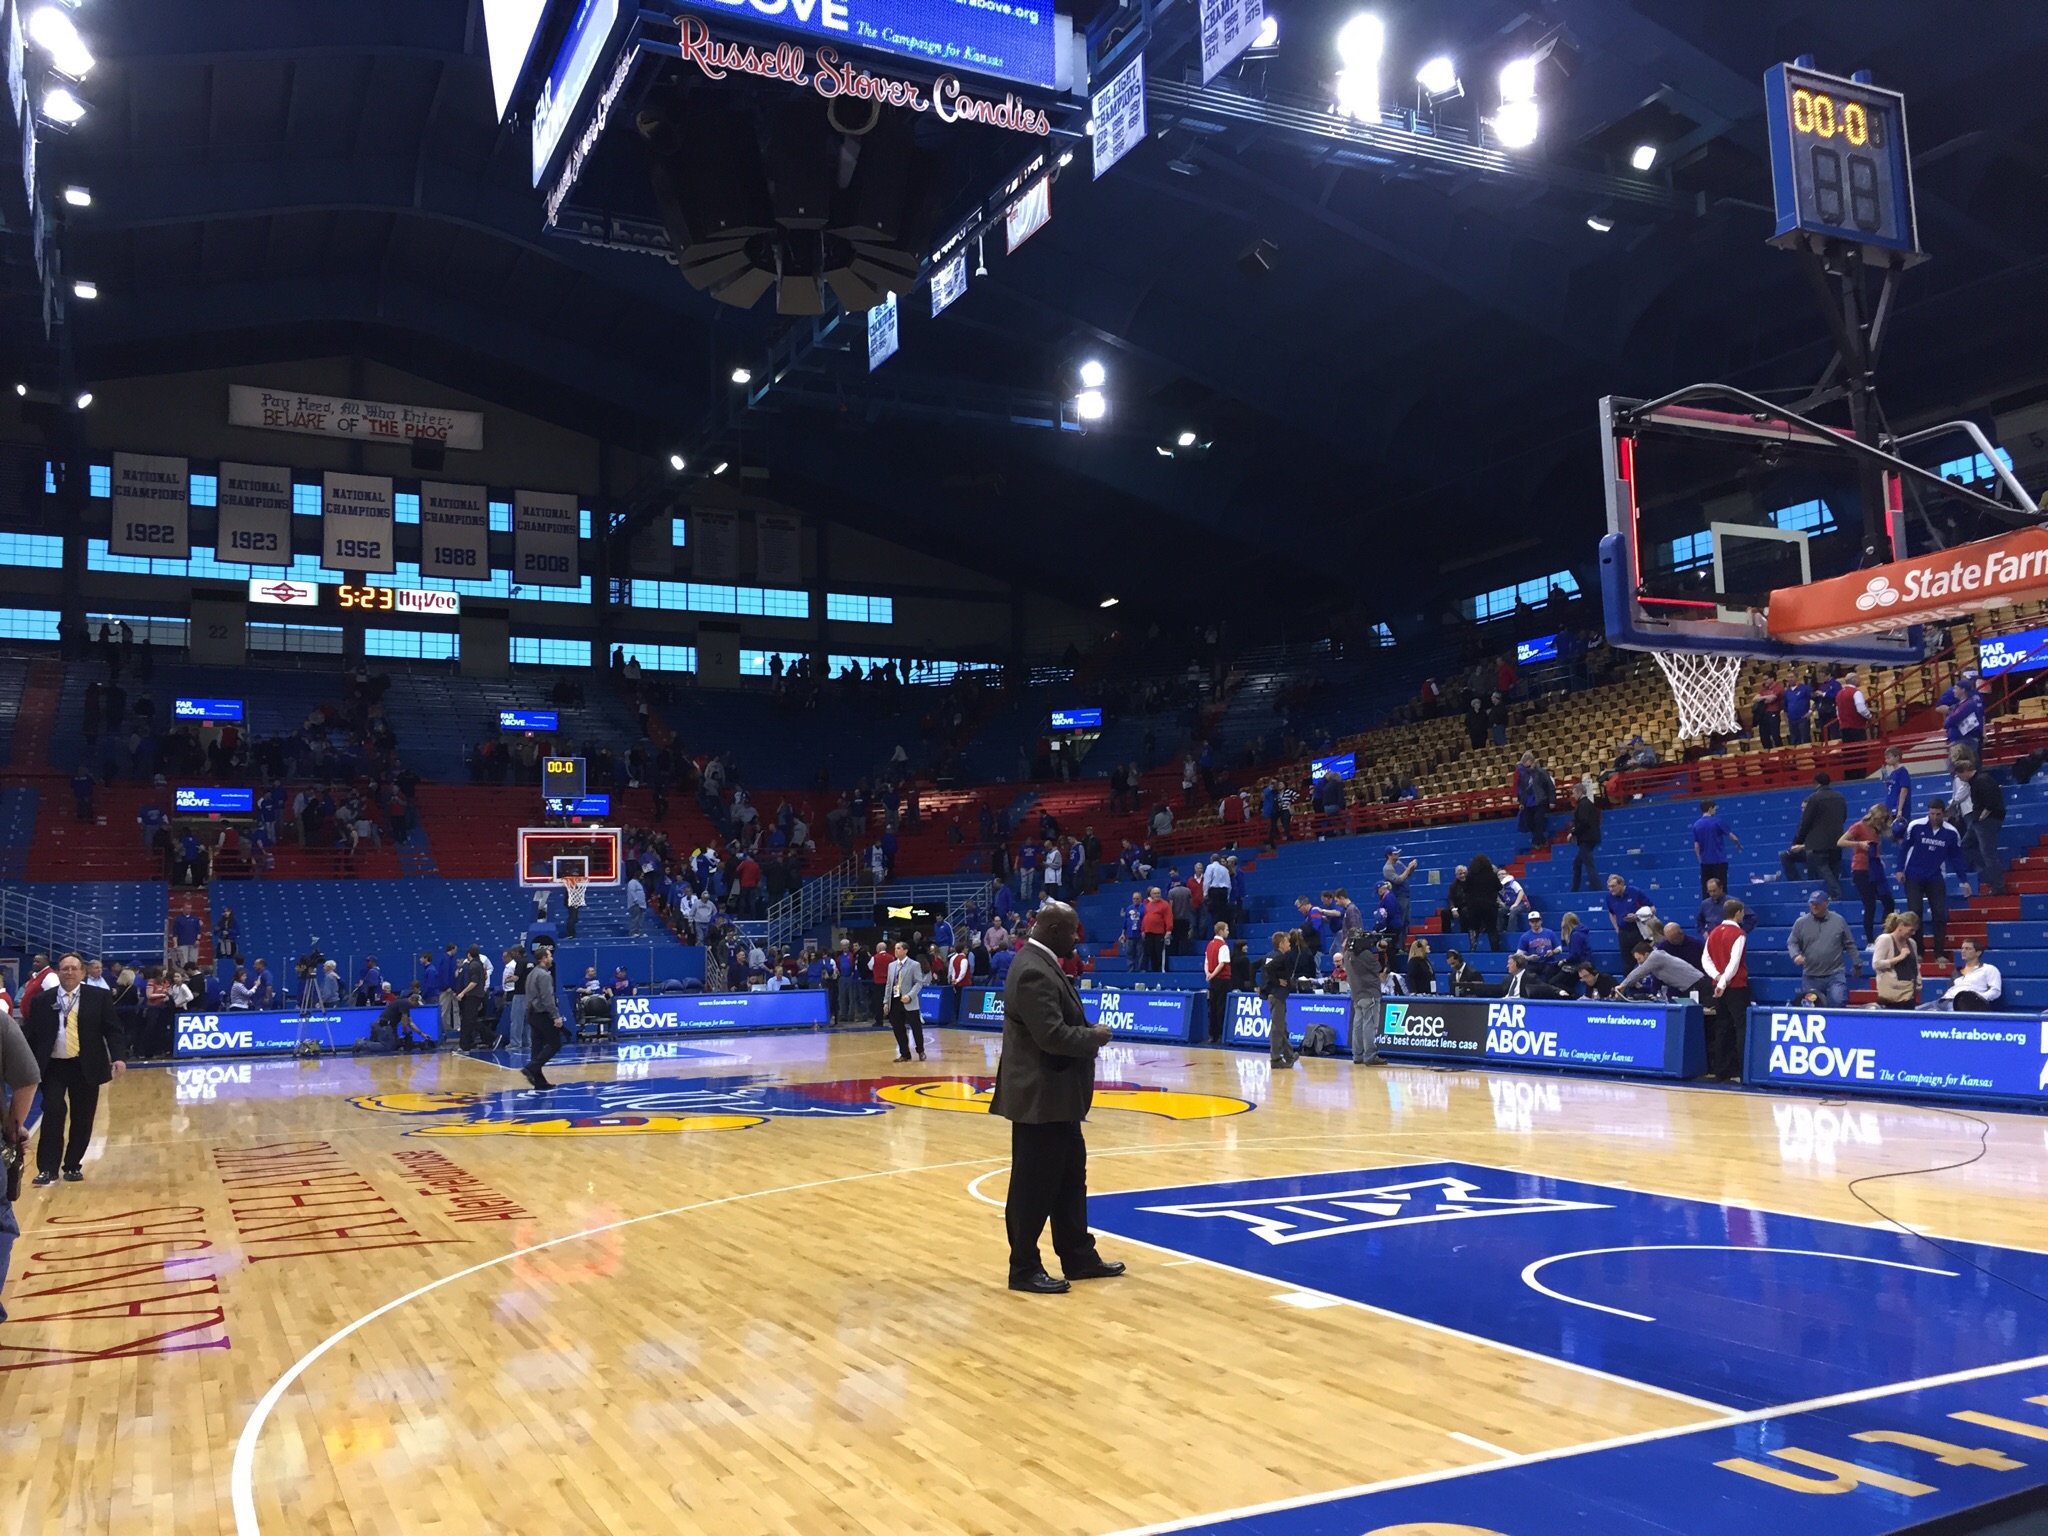 The floor at Allen Fieldhouse before KU's victory over the Wildcats on Feb. 21, 2014. Photo by Ryan Landreth.